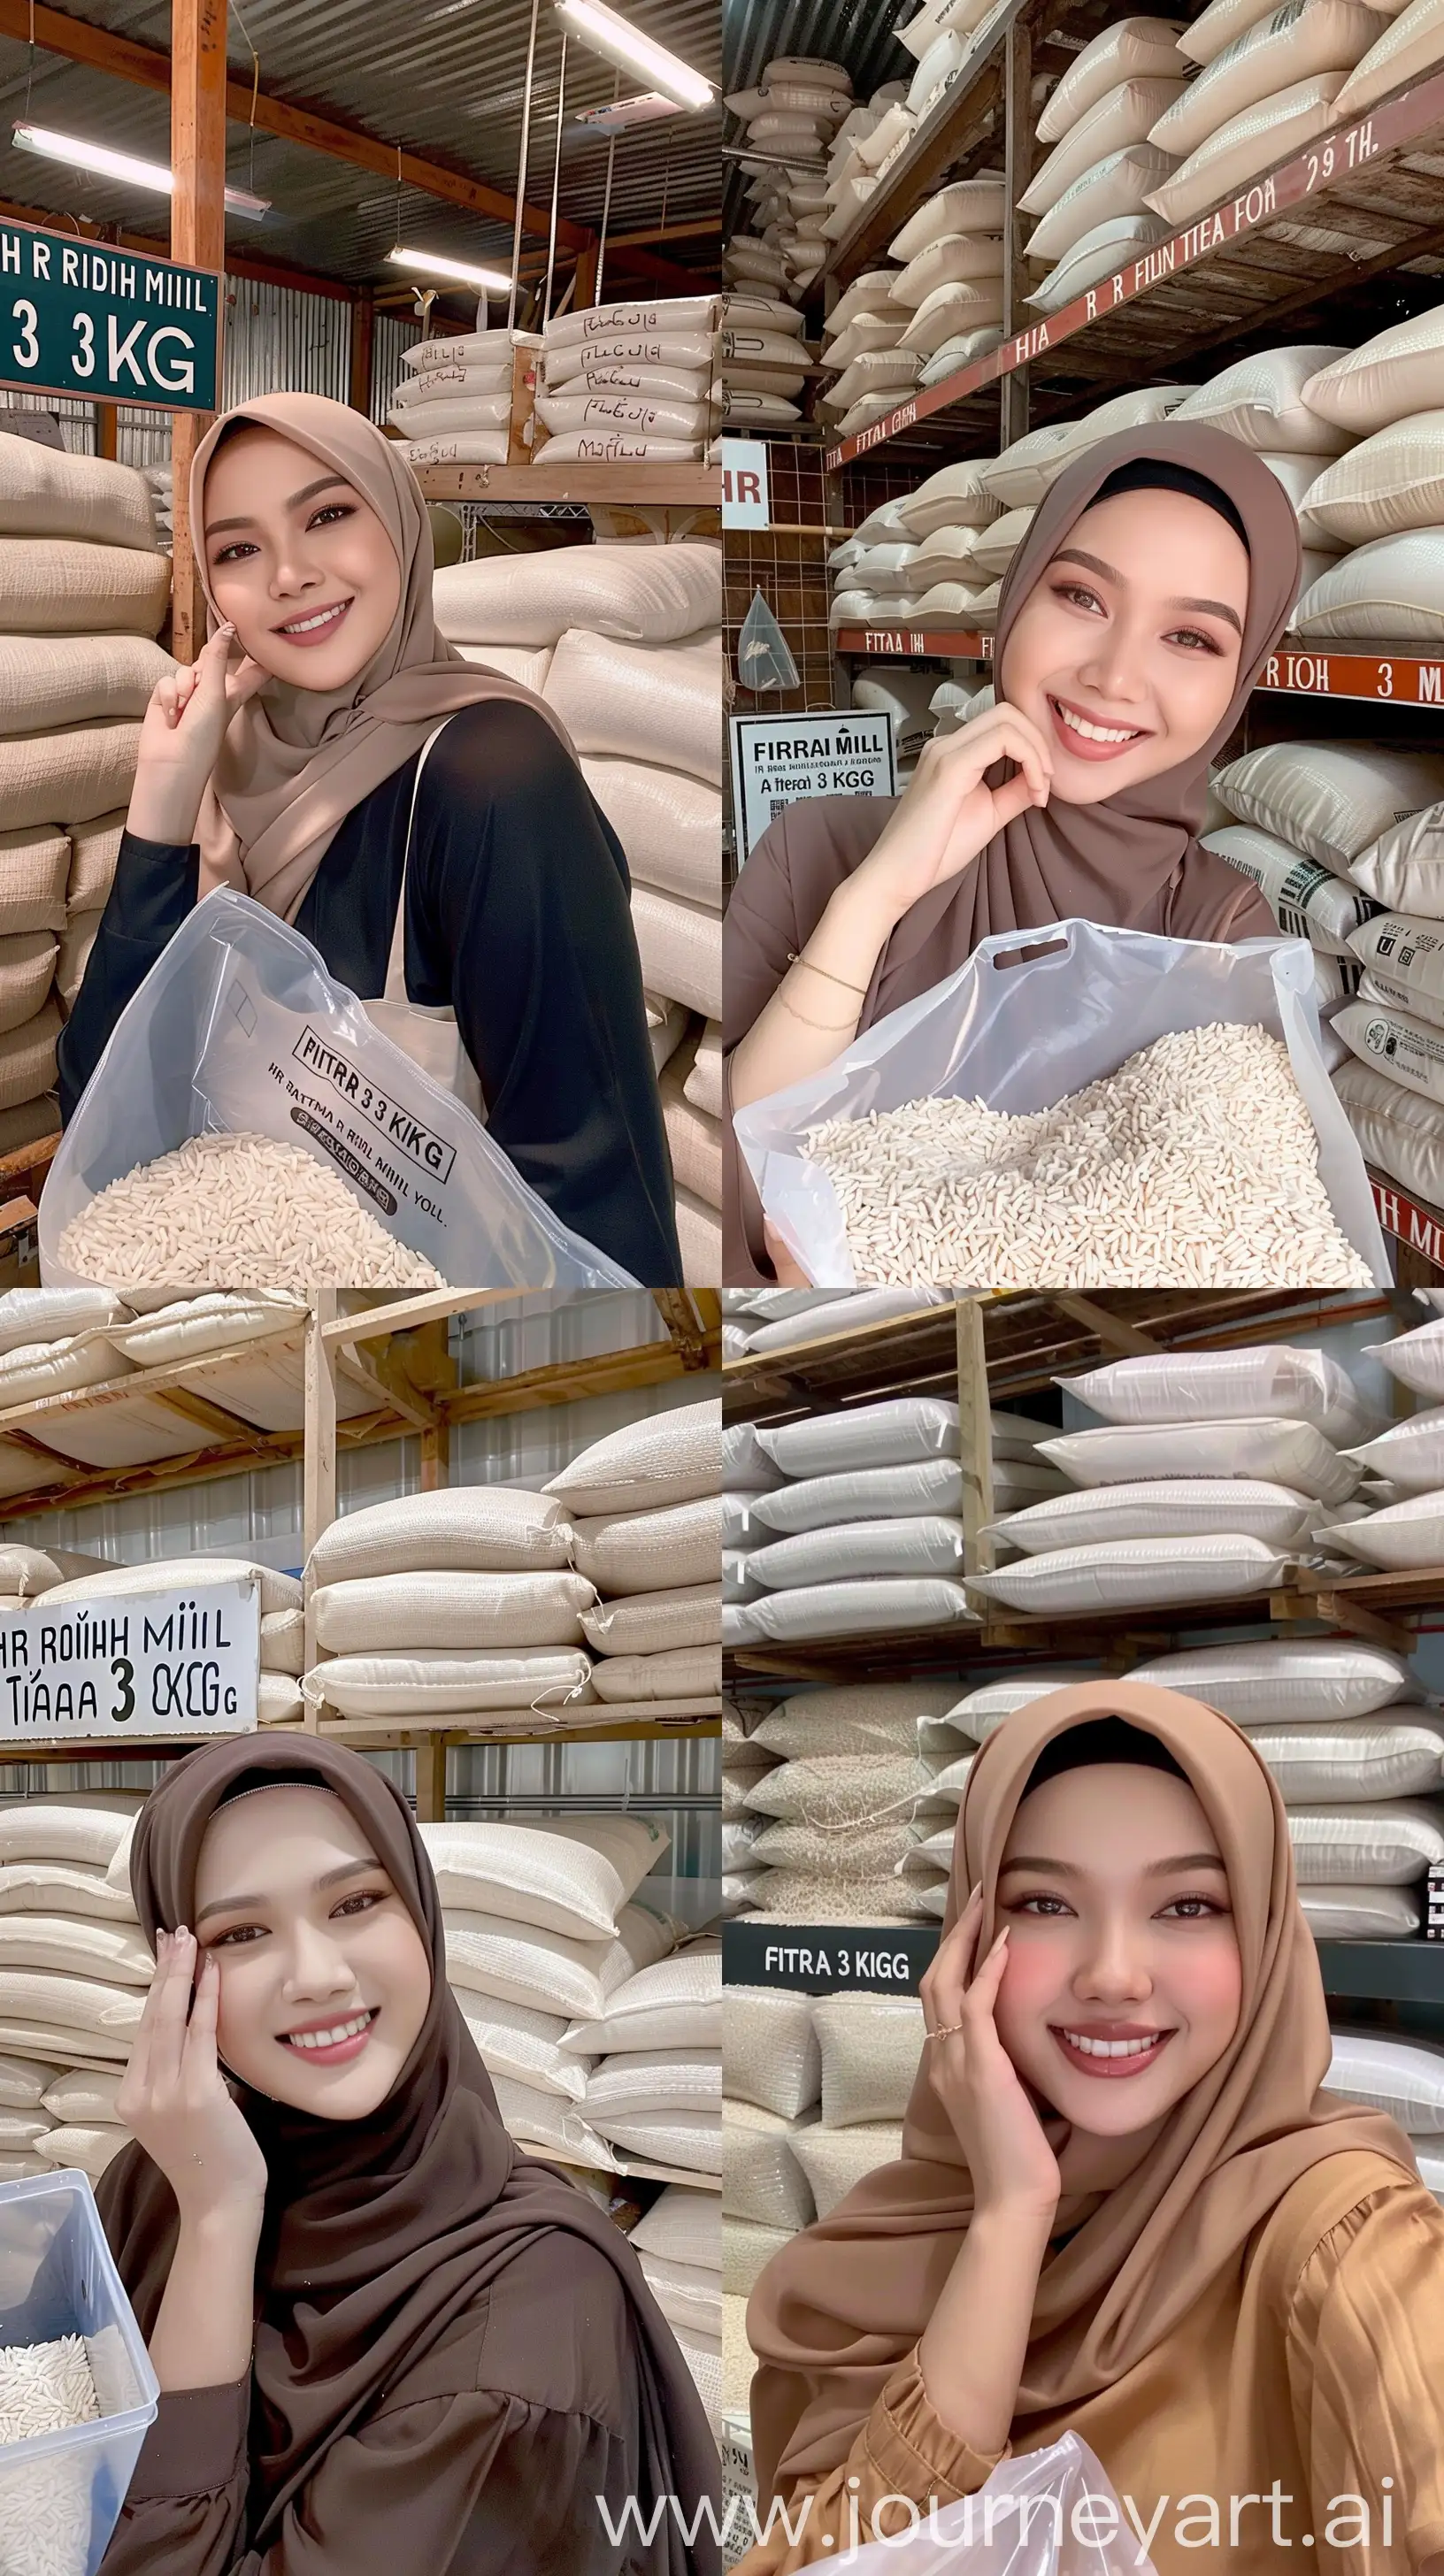 aestethic selfie, blackpink's jennie, wear hijab, inside indonesian modern rice store, hand on cheek, warm smile,  the are stacks of white rice sacks at the store, carrying white rice in square plastic bag packaging, "FITRAH 3 KG" is written on the plastic packaging, "HR RICE MILL" is written on the sign board --ar 9:16 